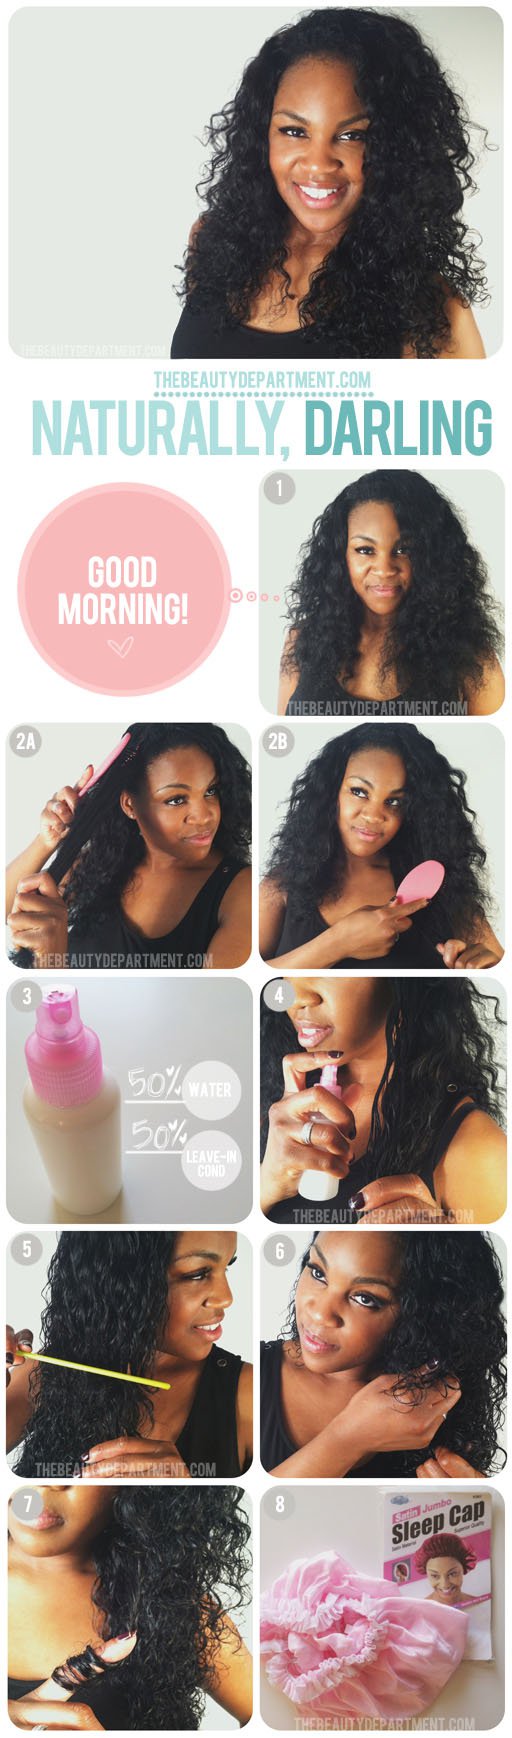 12 Brilliant Useful Tips For Making The Most Of Your Curly Hair